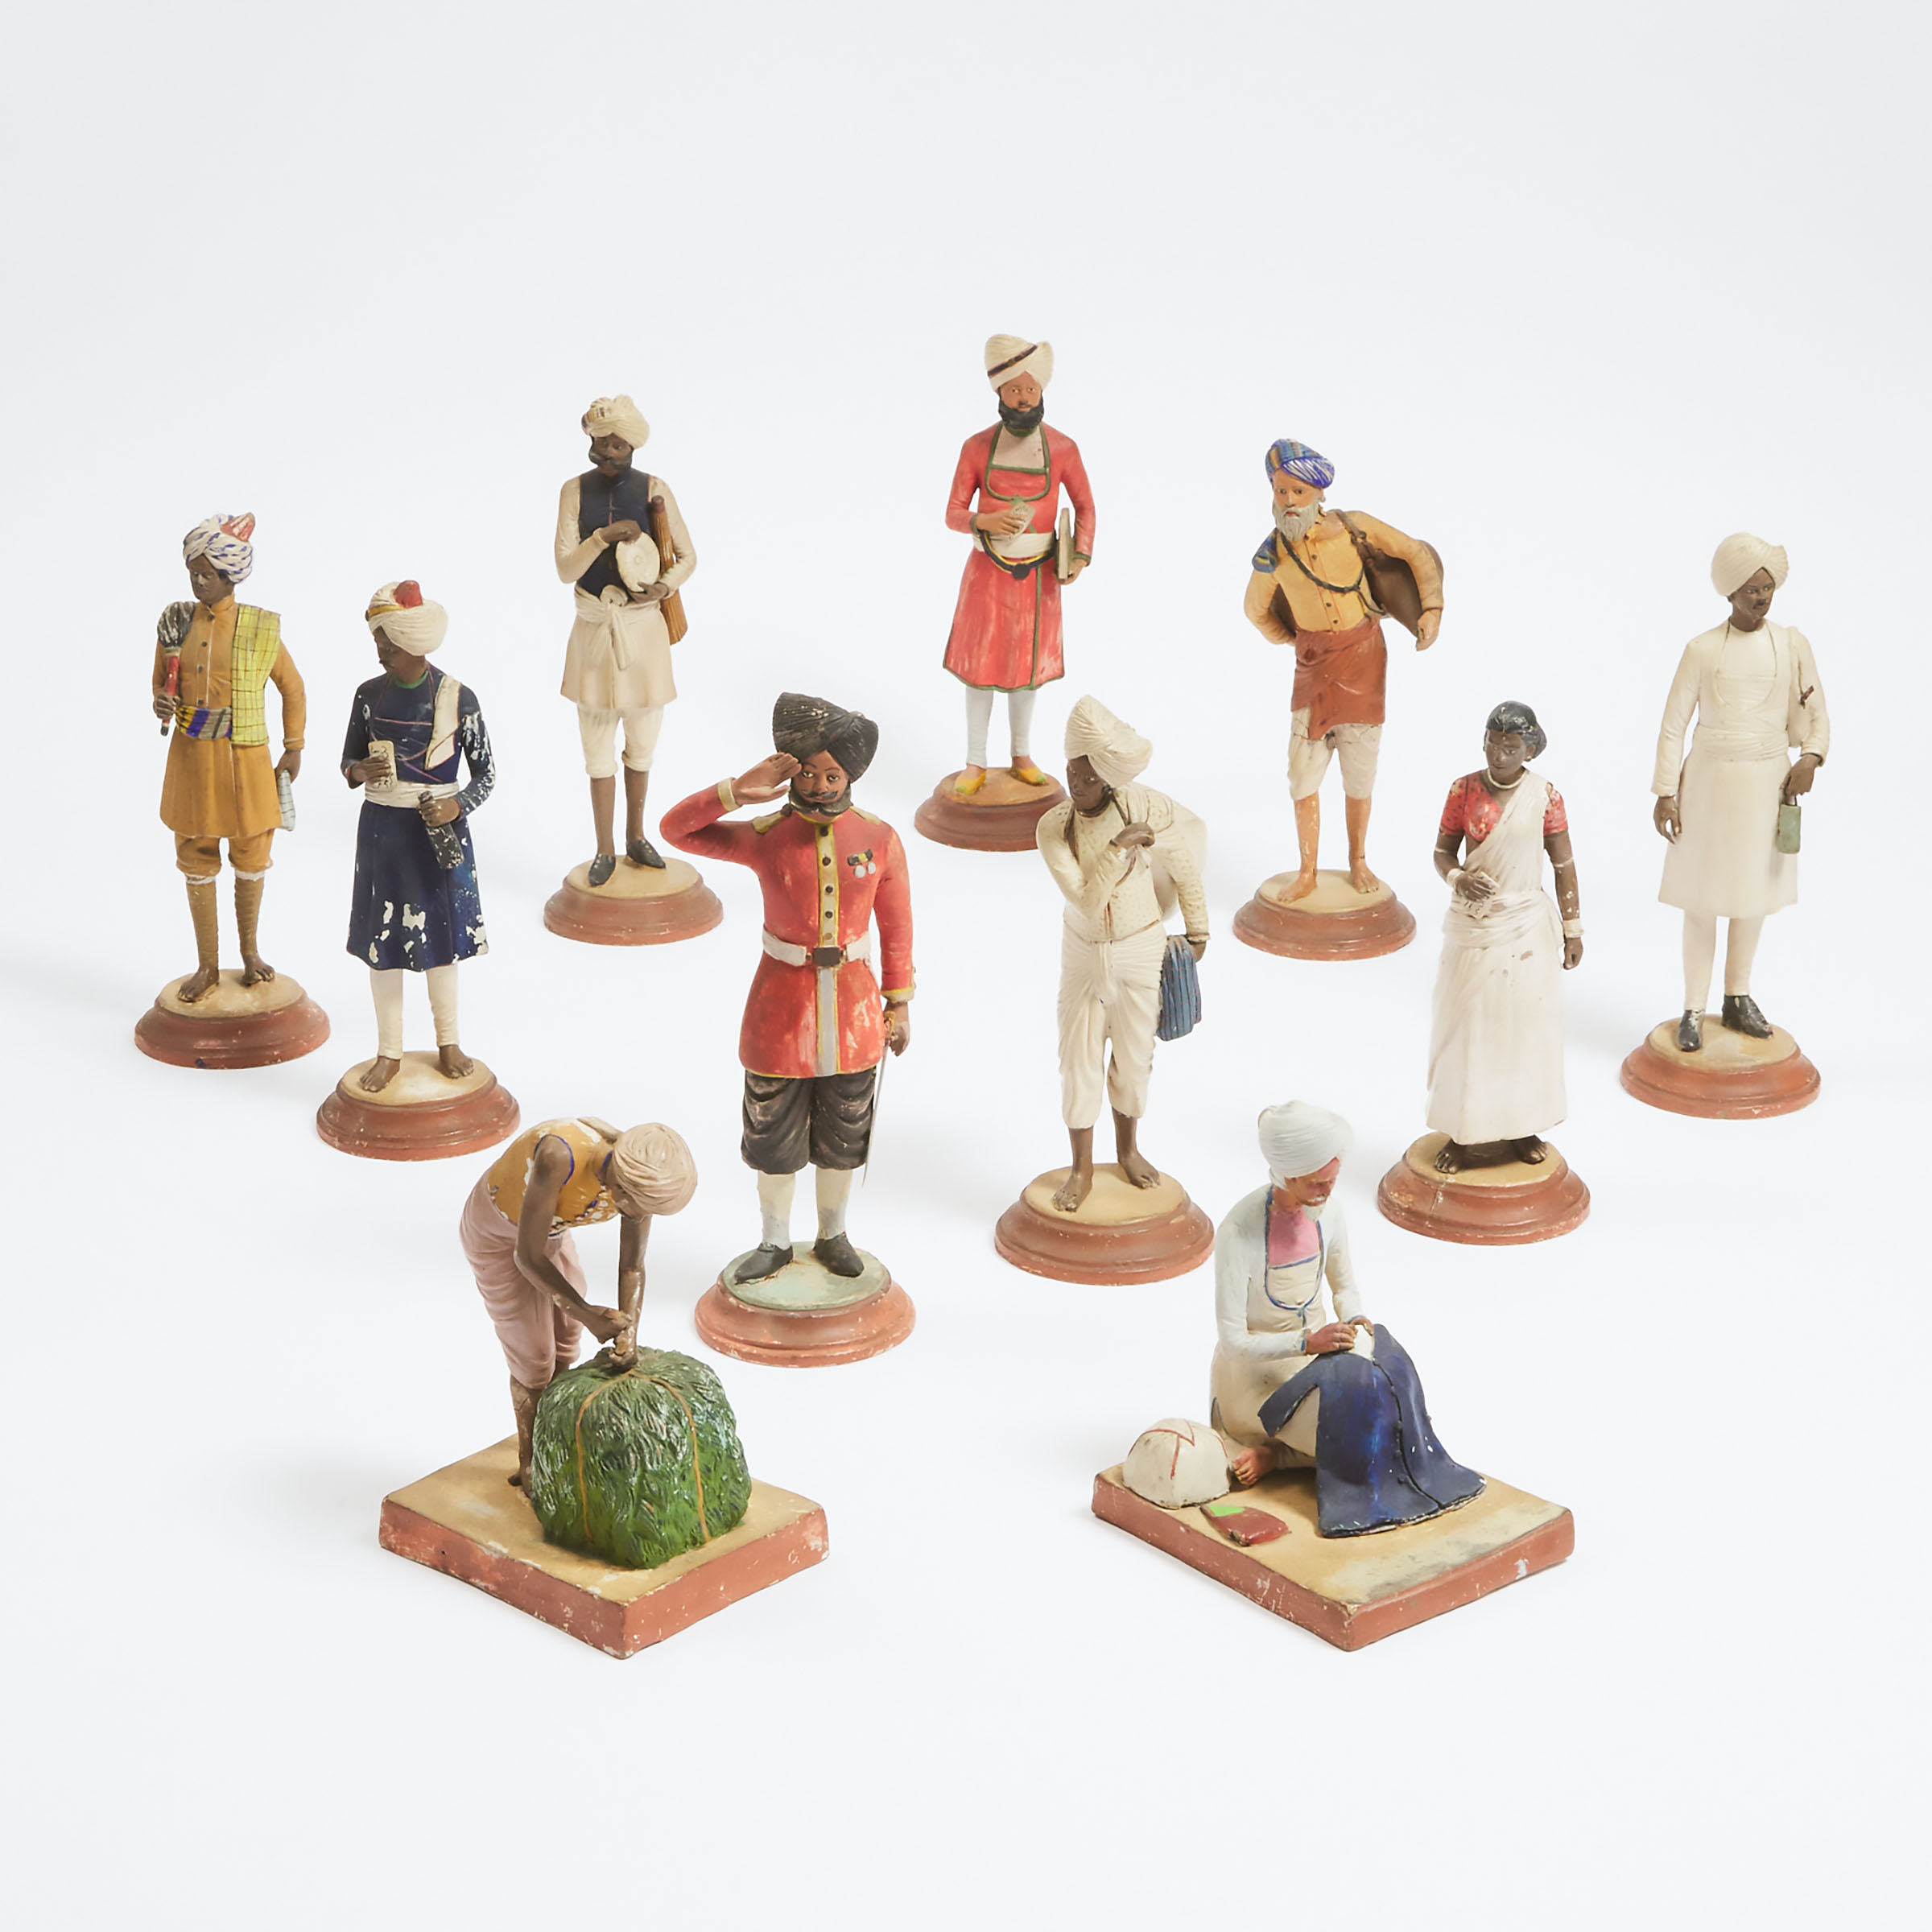 Group of Eleven East India Company School Painted Terracotta Figures, Lucknow, India, late 19th century